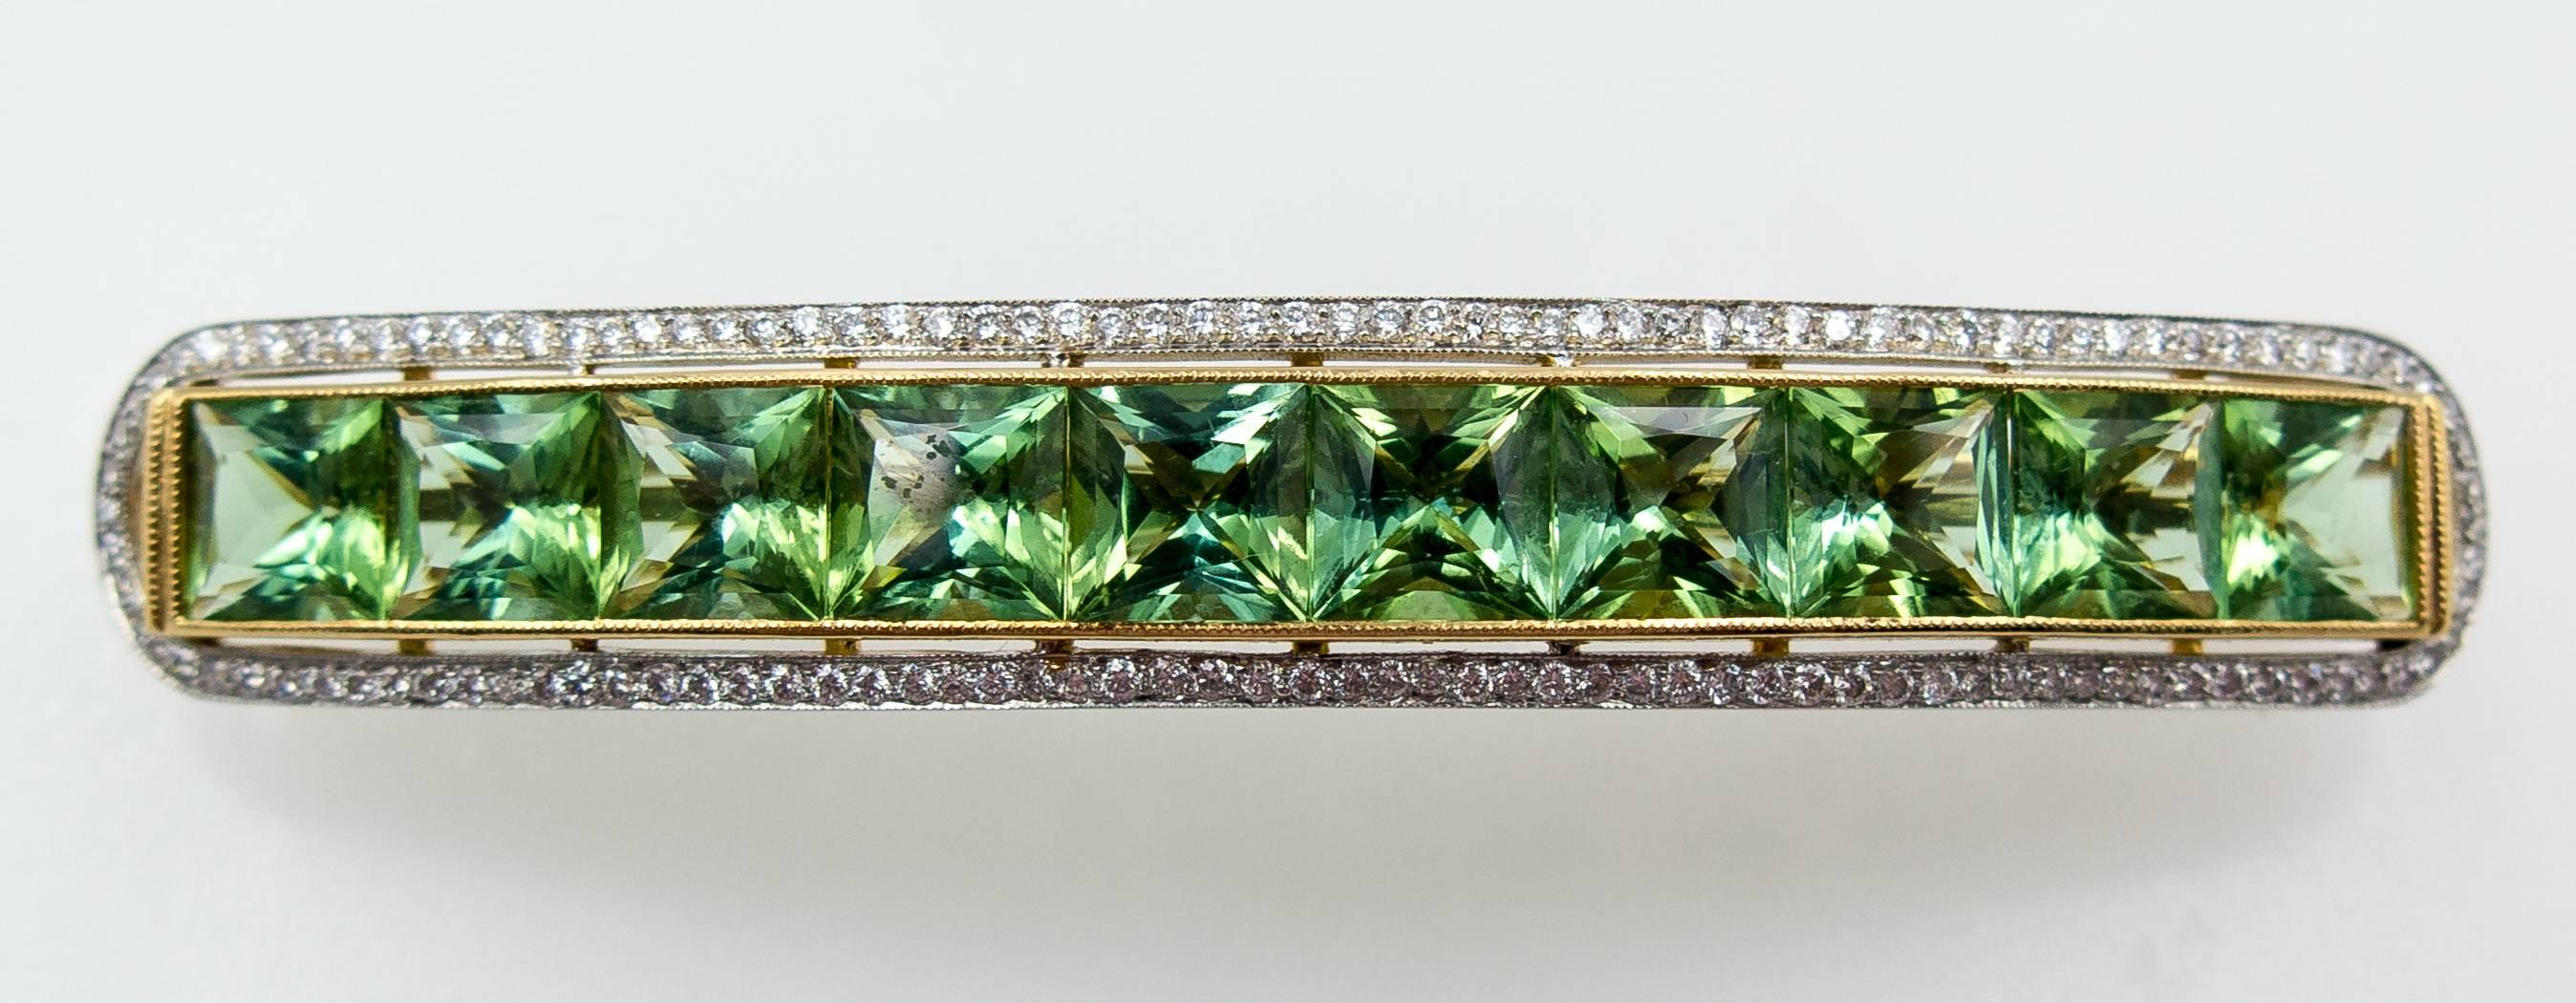 A totally unnecessary hair ornament, and perhaps for that reason, something desirable.  We assume this was custom made to the original owner's specifications because the workmanship is so beautiful and the mint green tourmalines so well matched. 